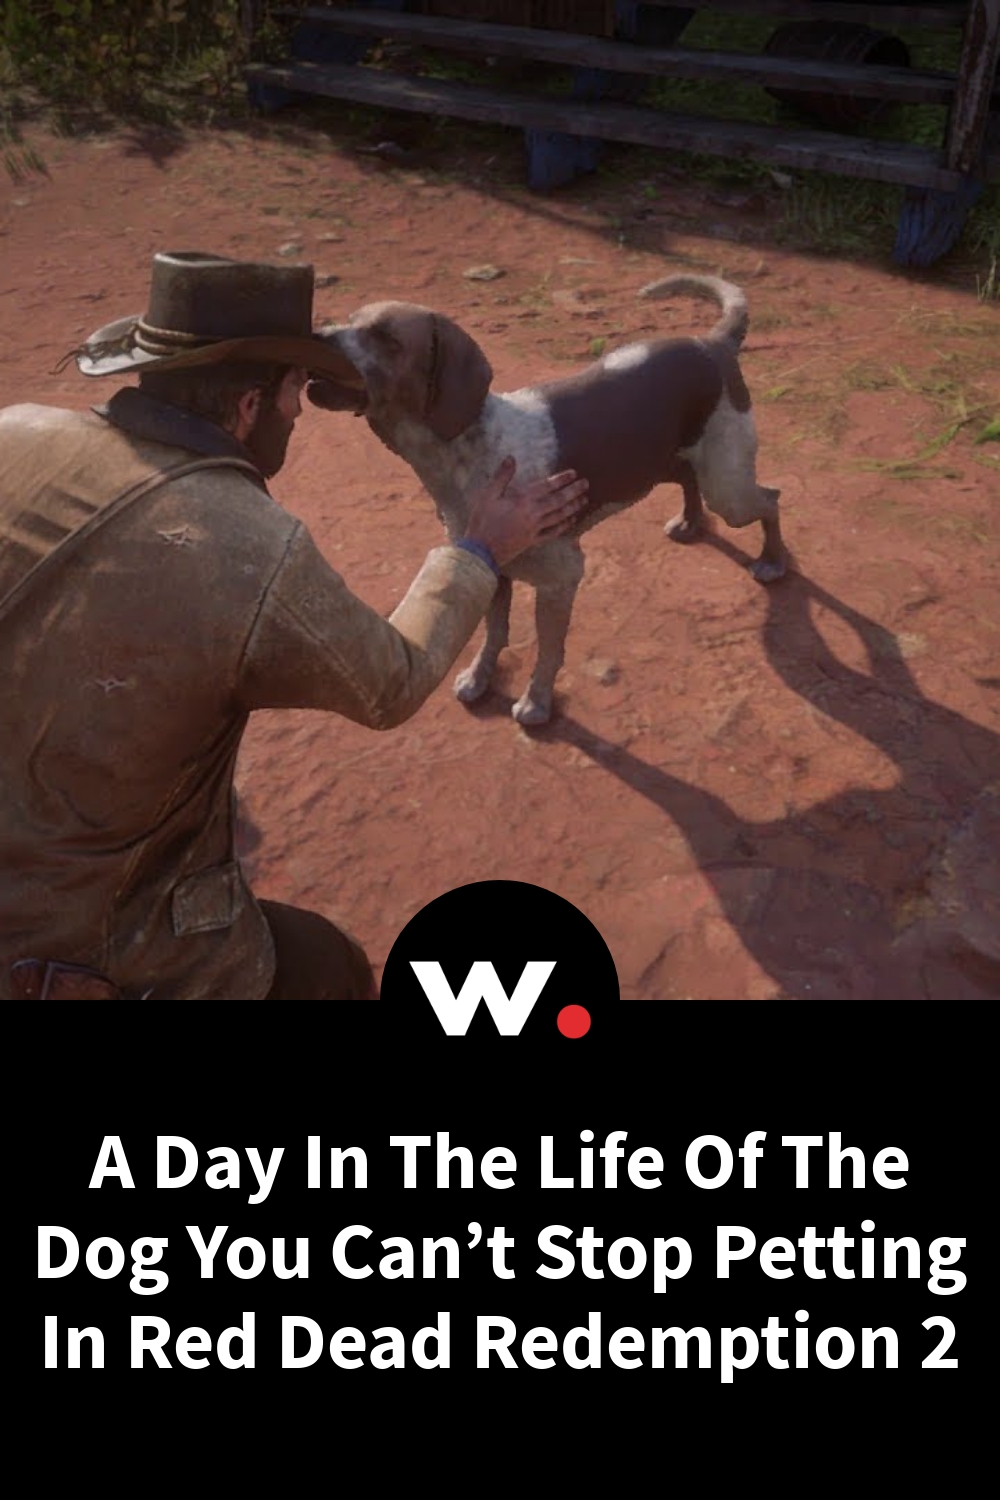 A Day In The Life Of The Dog You Can’t Stop Petting In Red Dead Redemption 2